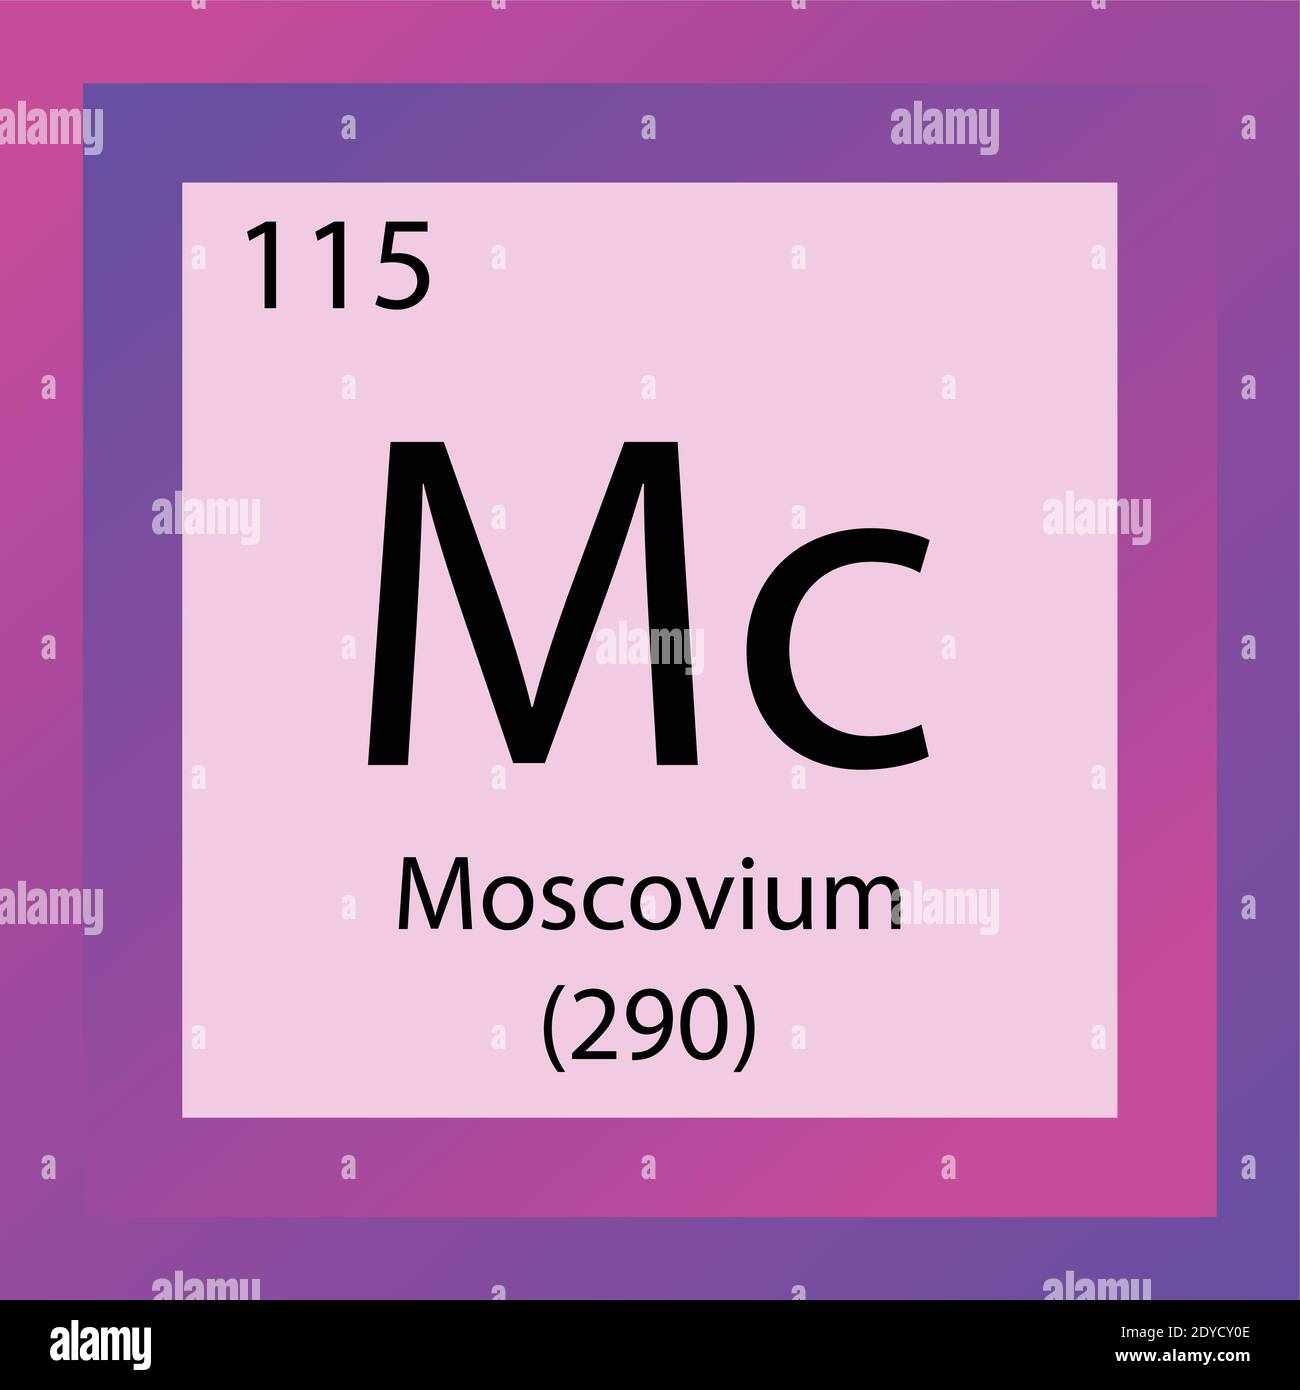 Mc Moscovium Chemical Element Periodic Table. Single element vector illustration, Element icon with molar mass and atomic number. Stock Vector